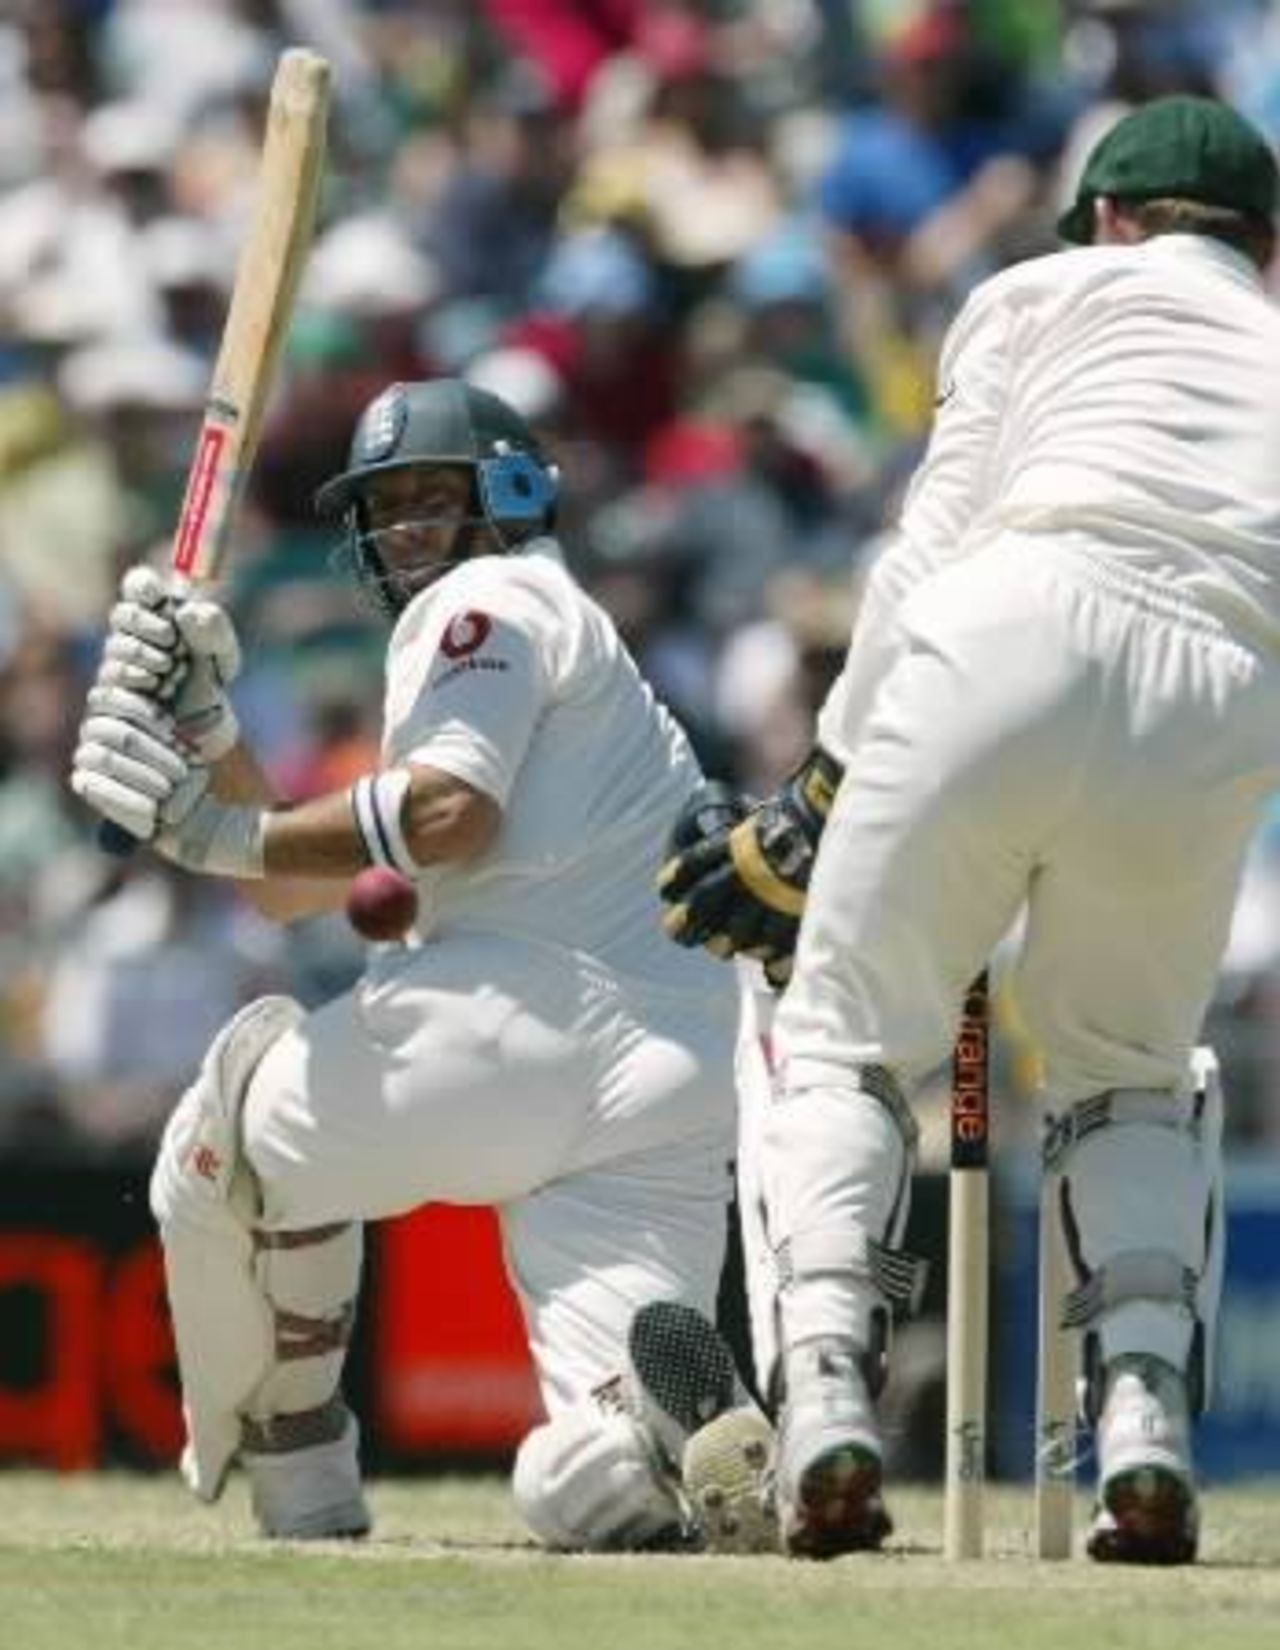 Nasser Hussain on his way to 61 against Australia in Perth, 3rd day of 3rd Ashes Test, 1 Dec 2002